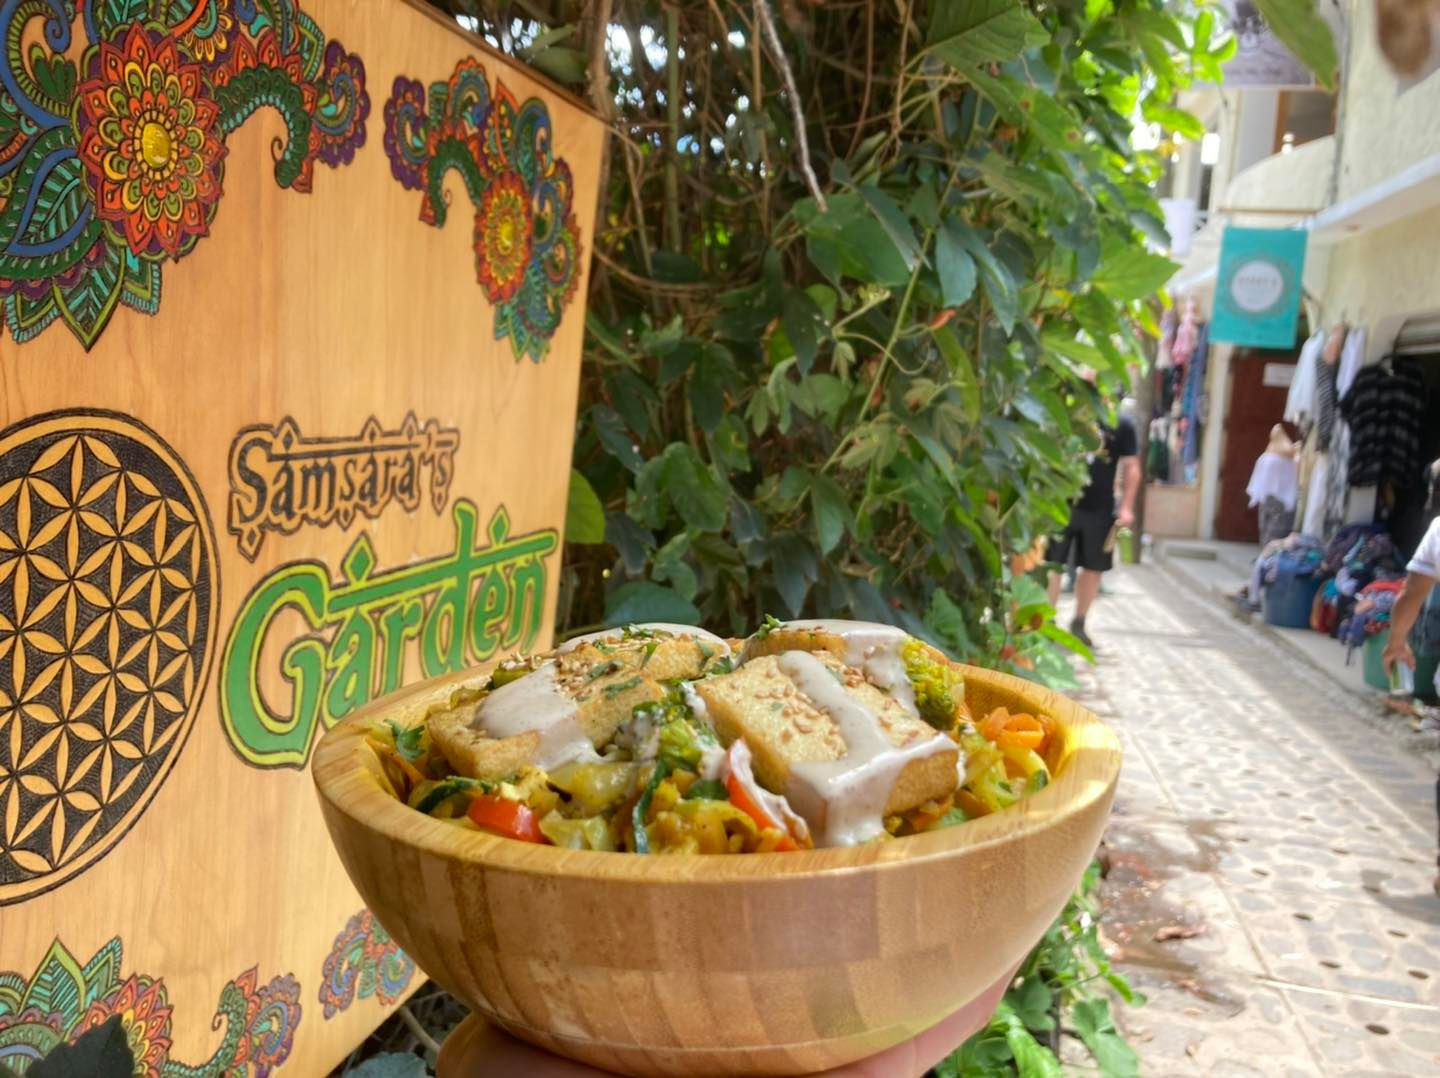 Tofu Buddha bowl held in front of the welcome sign at Samsara's Garden.